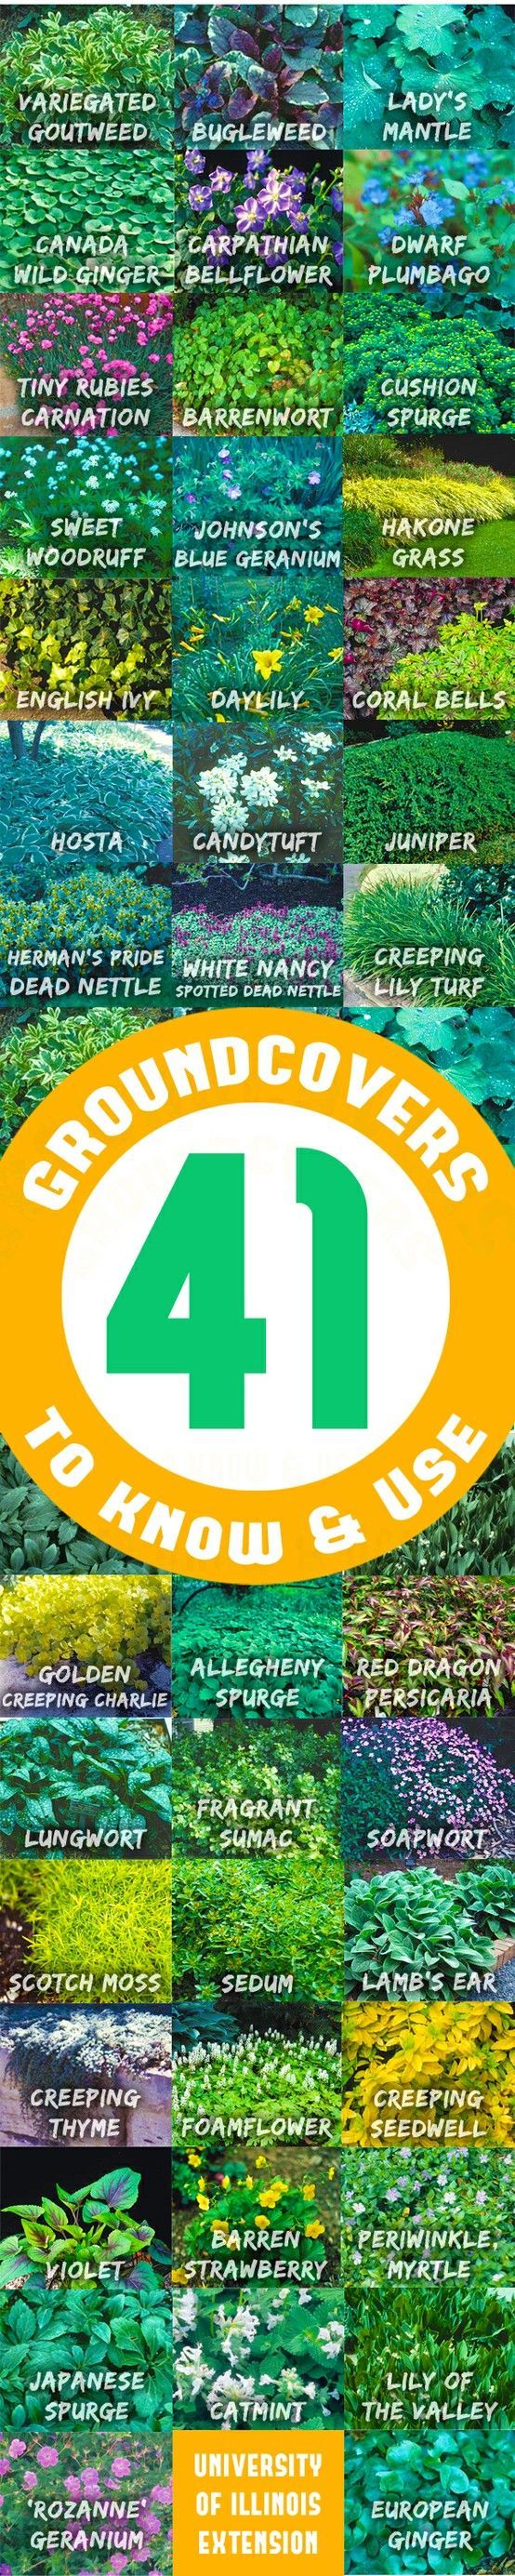 41 Groundcovers to Know & Use